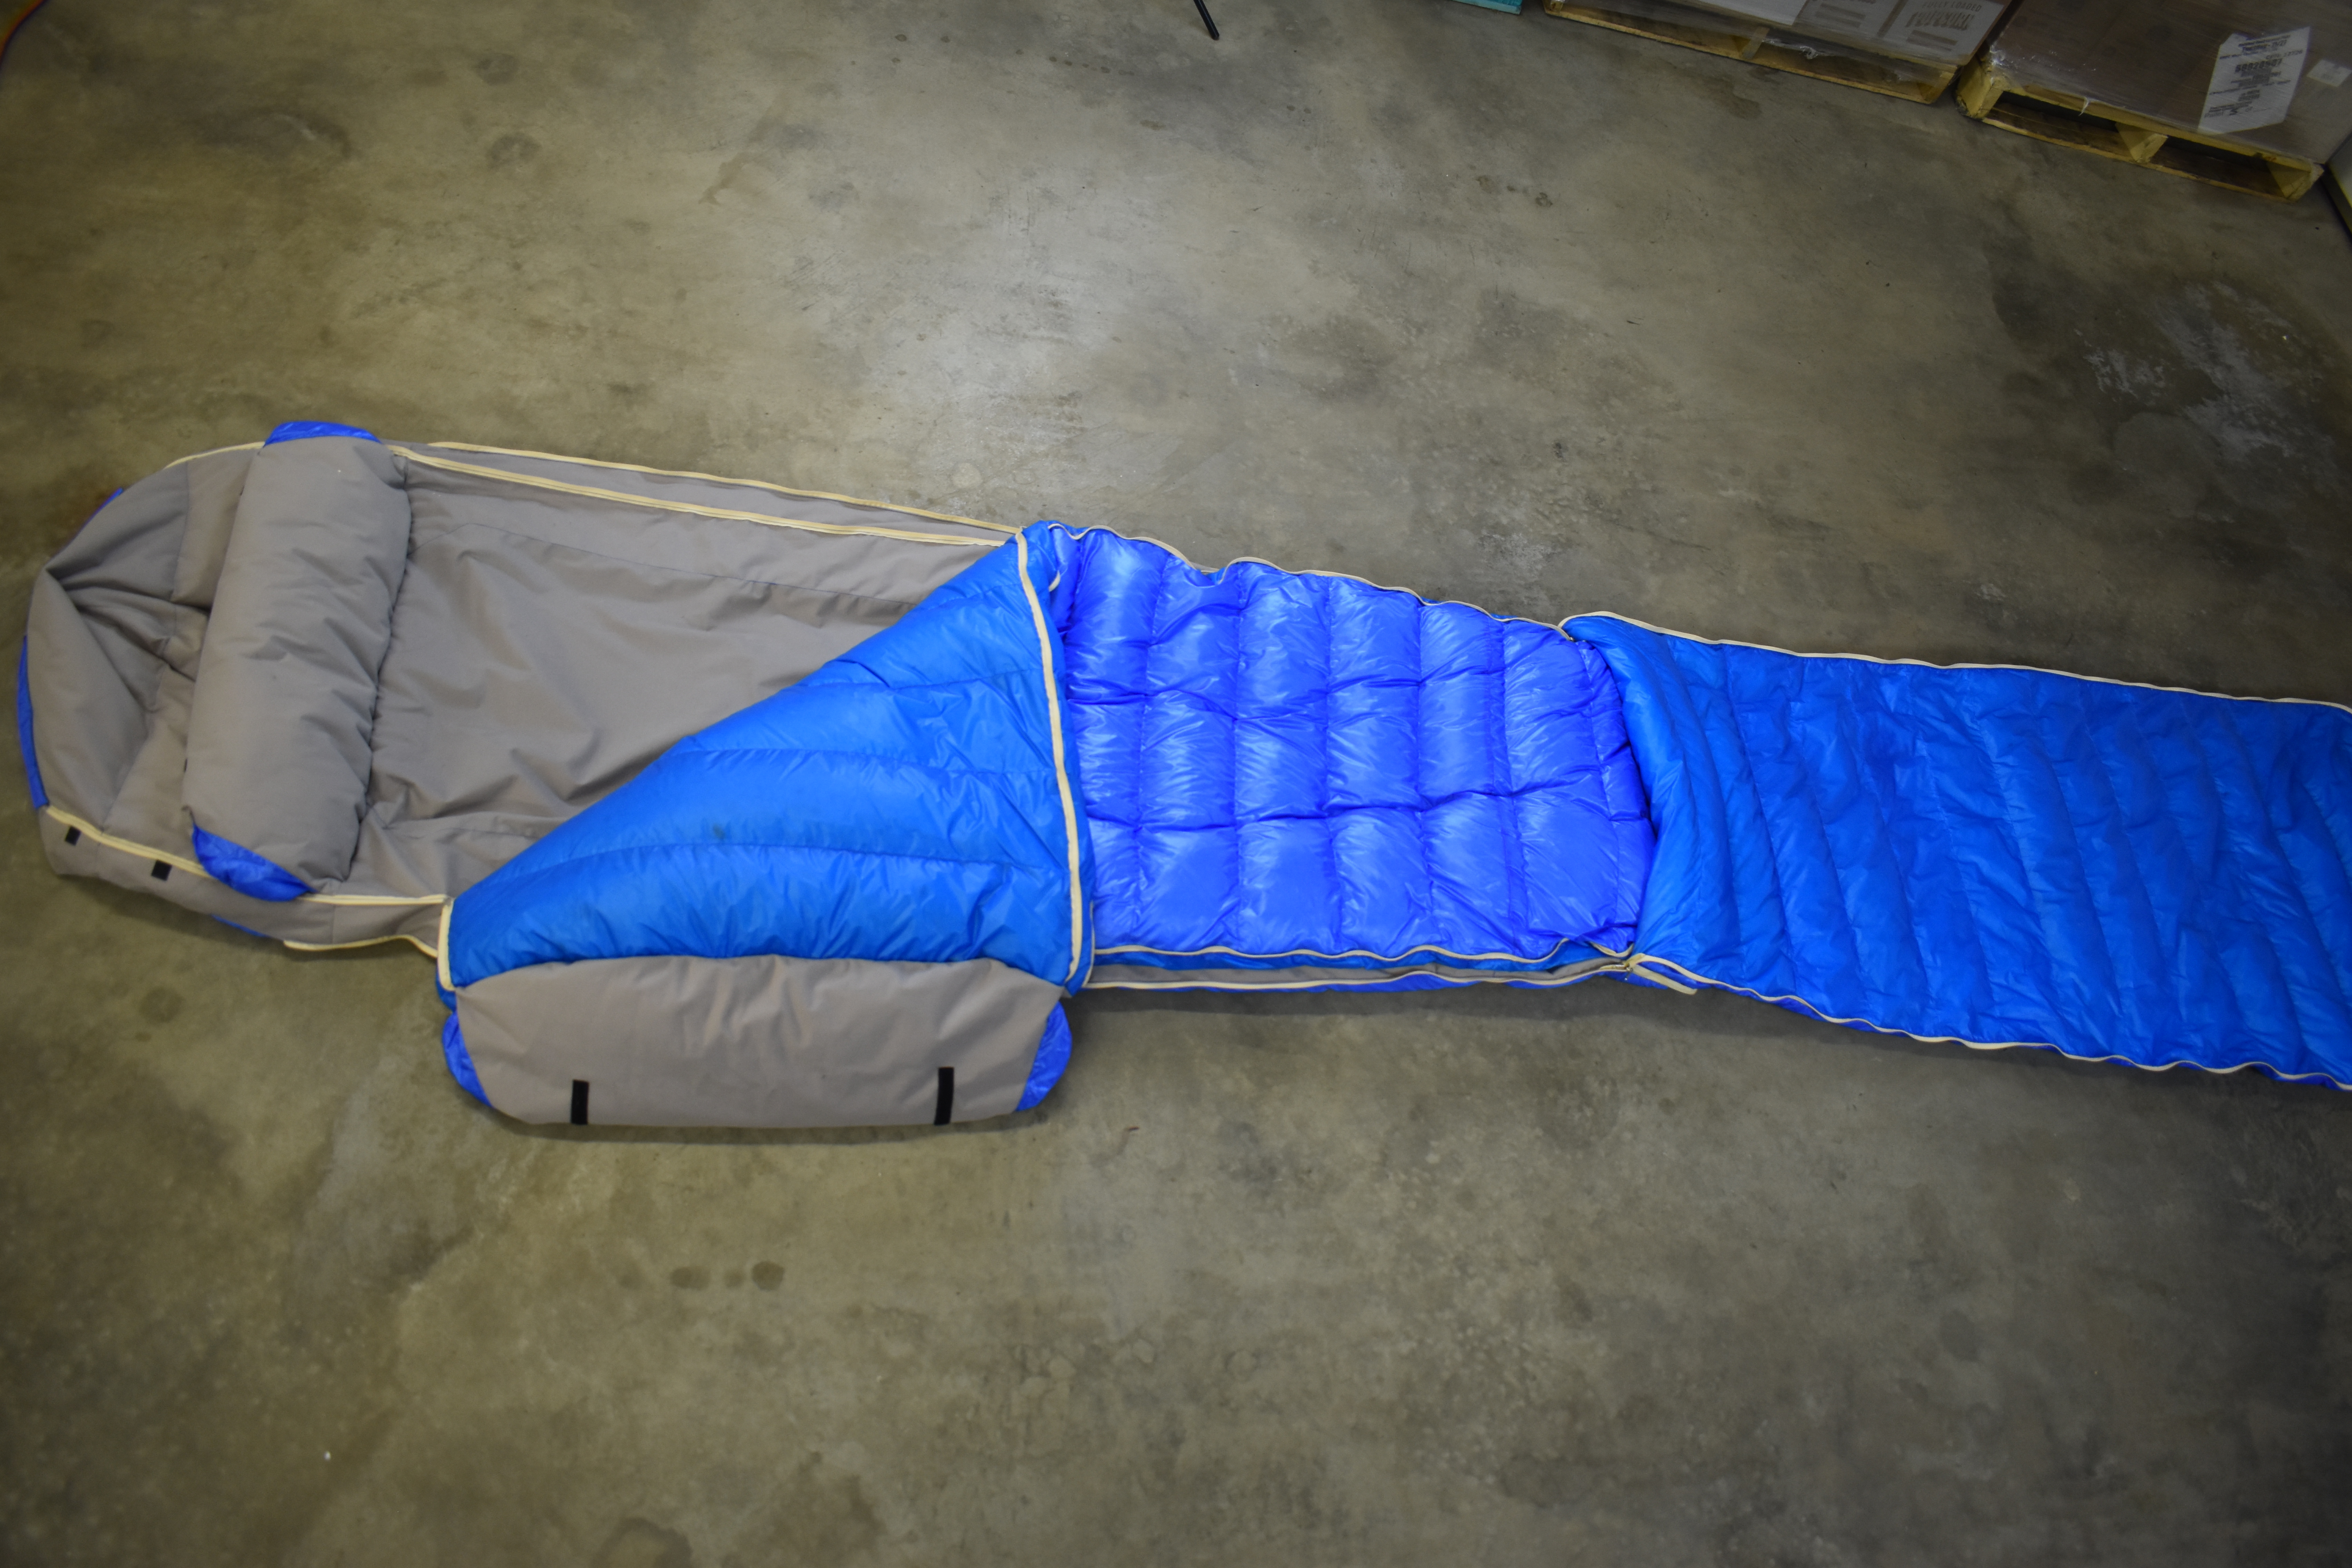 Understanding the Camp Quilt | Therm-a-Rest Blog